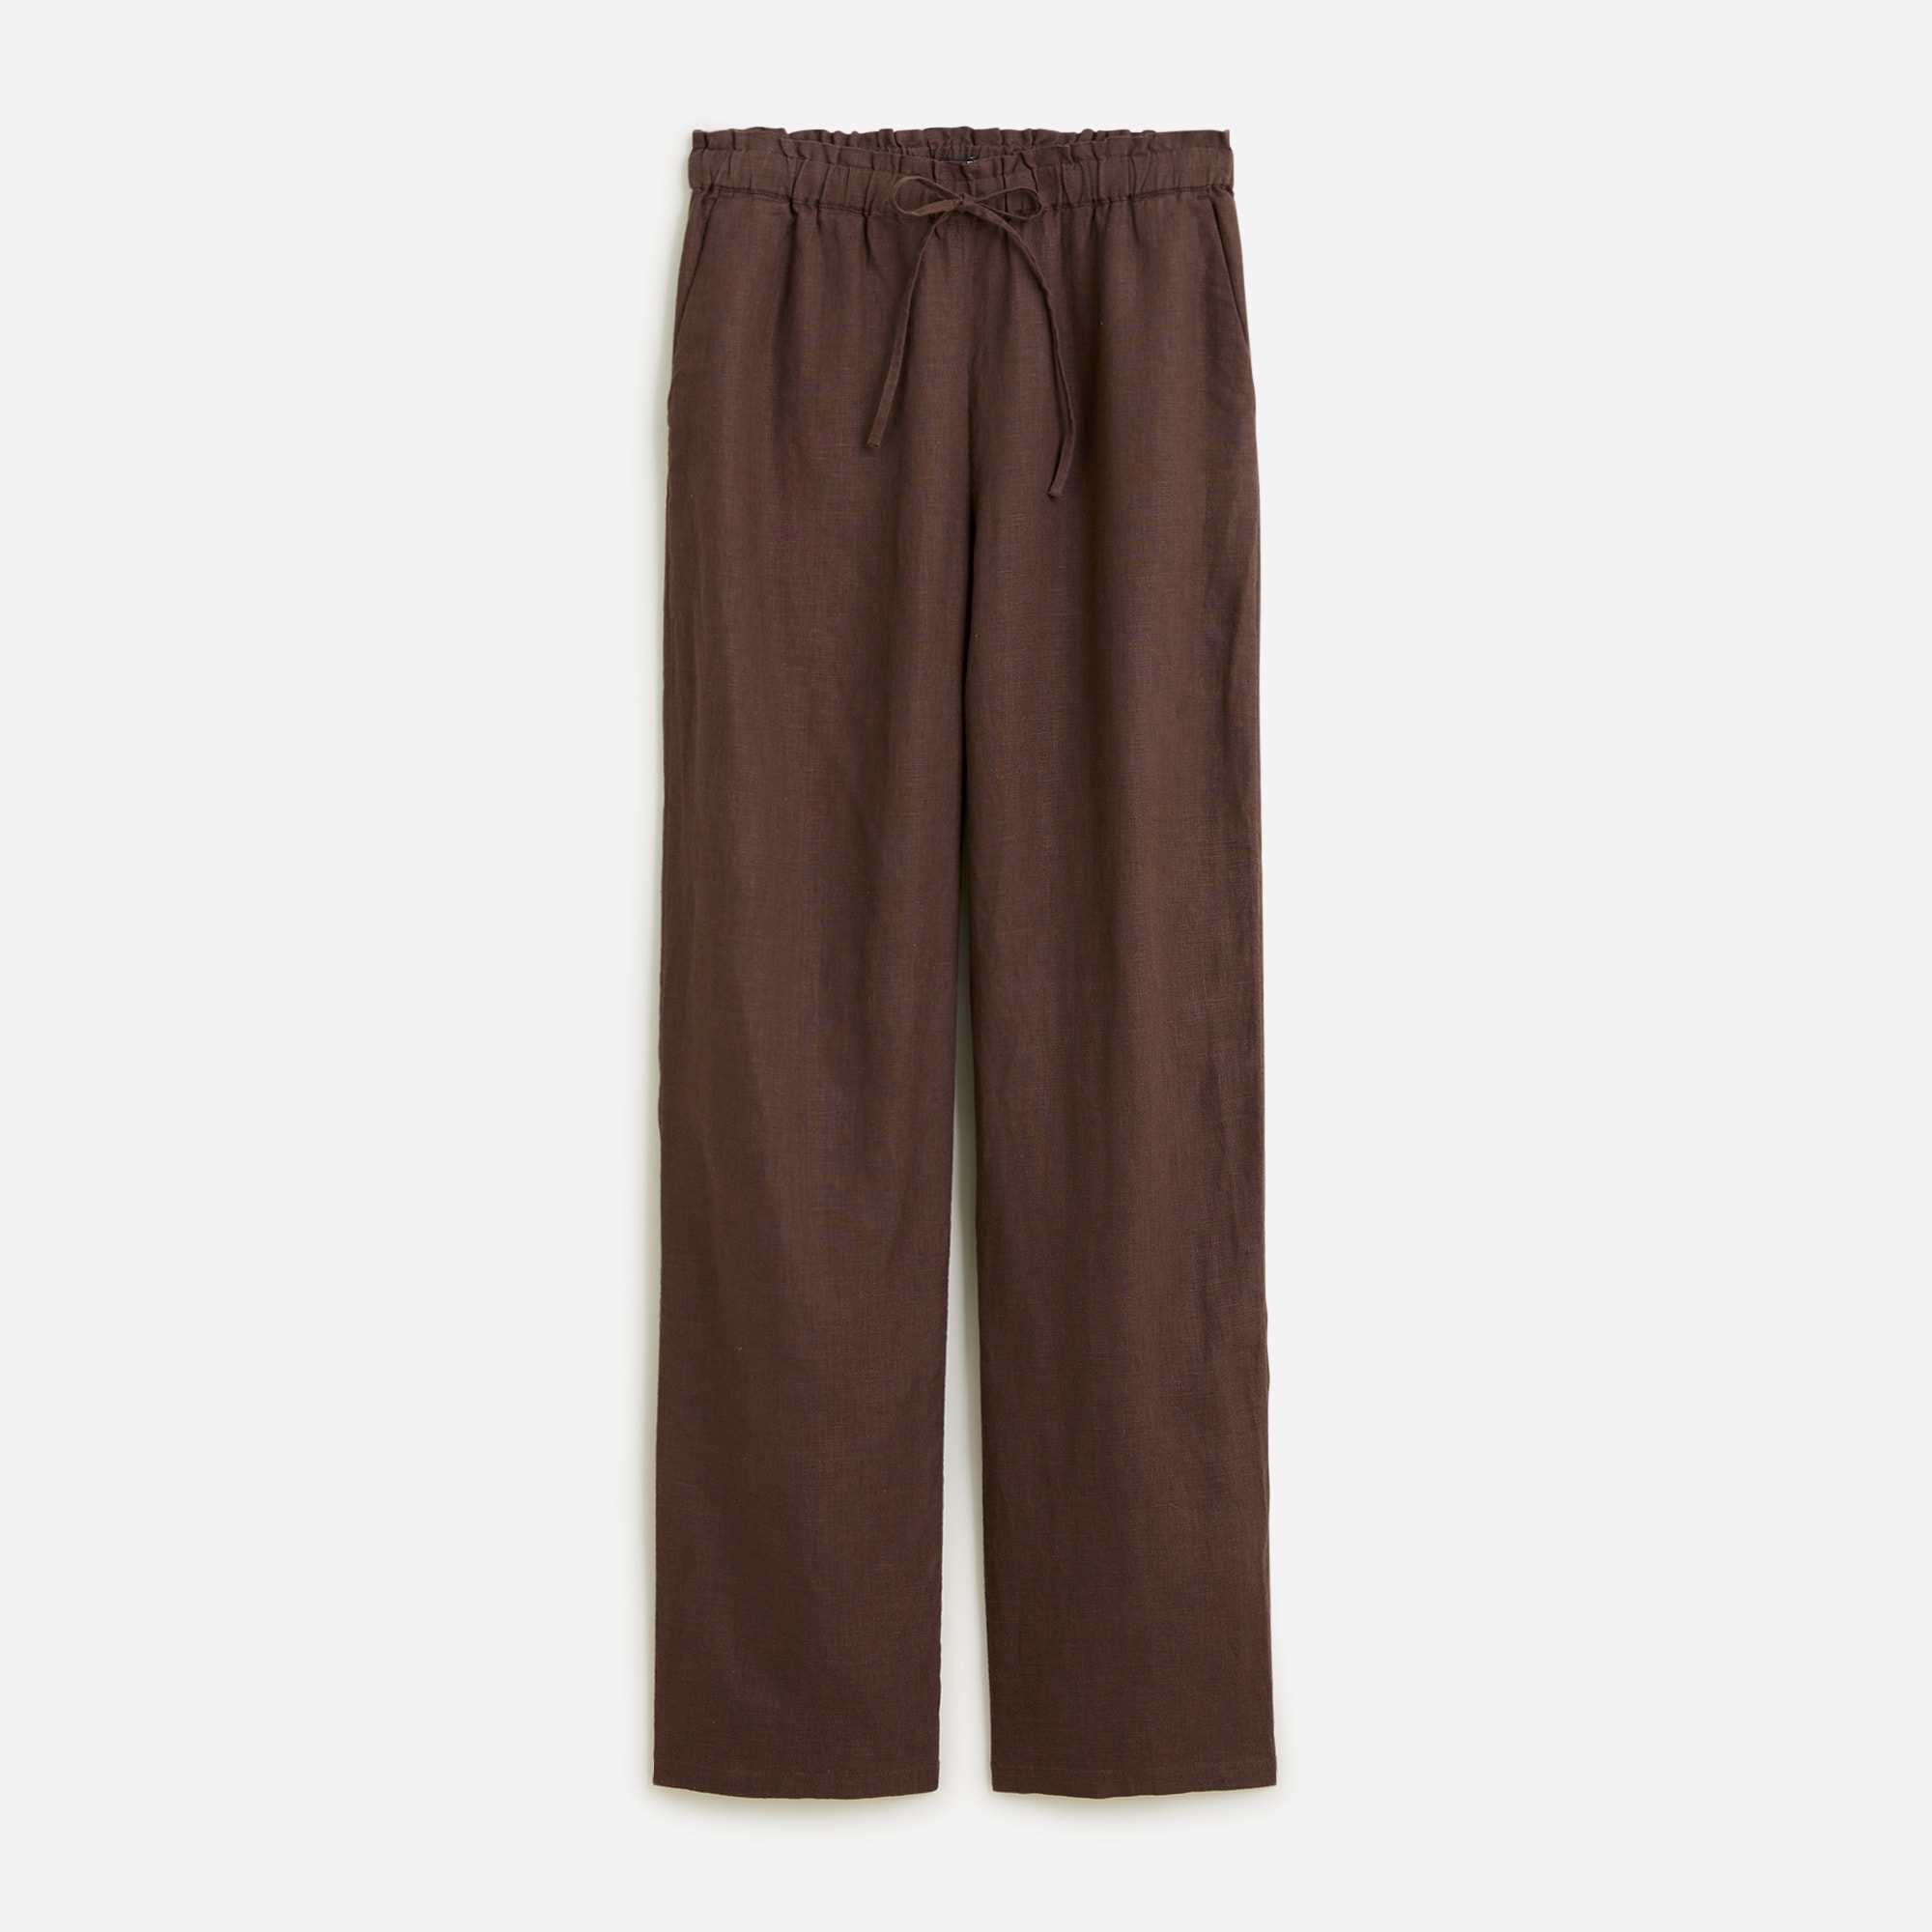 womens Soleil pant in linen